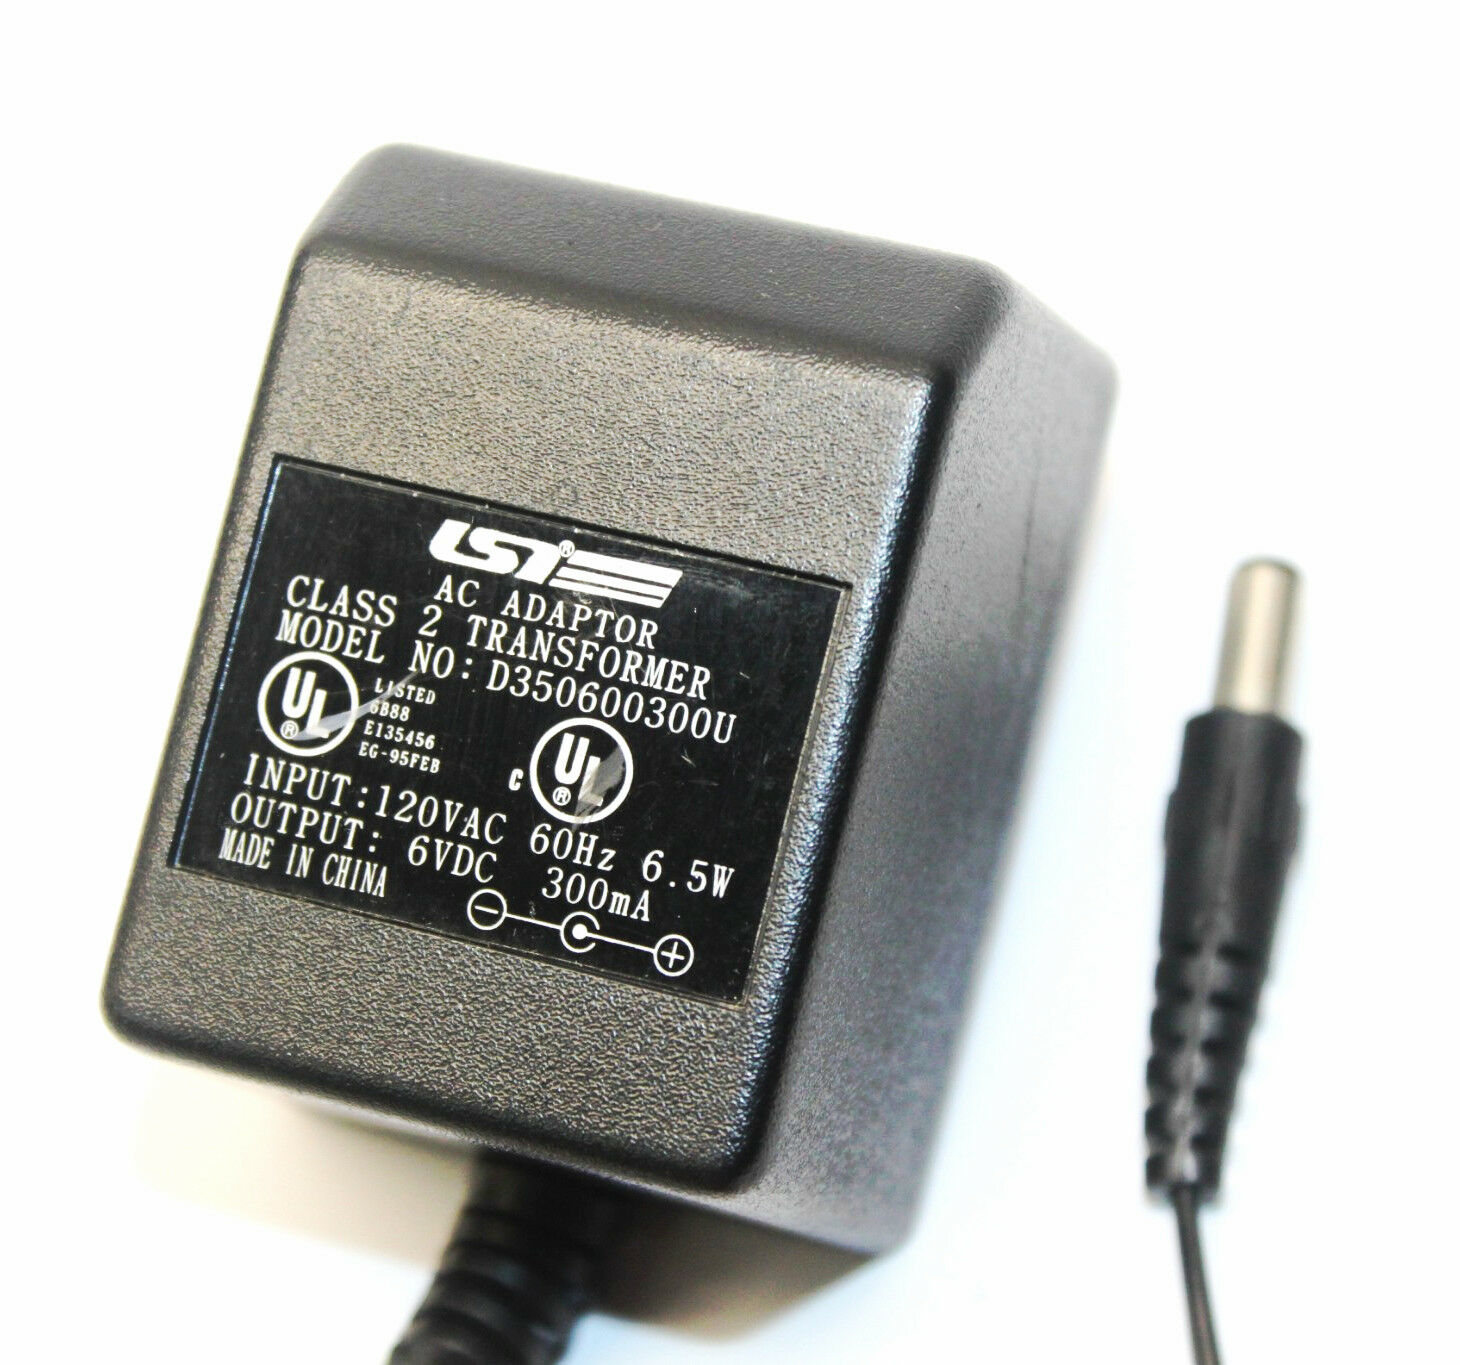 Genuine LSI D350600300U Class 2 Transformer AC Adapter Output DC 6V 300mA Brand: LSI Type: Adapter MPN: Does Not